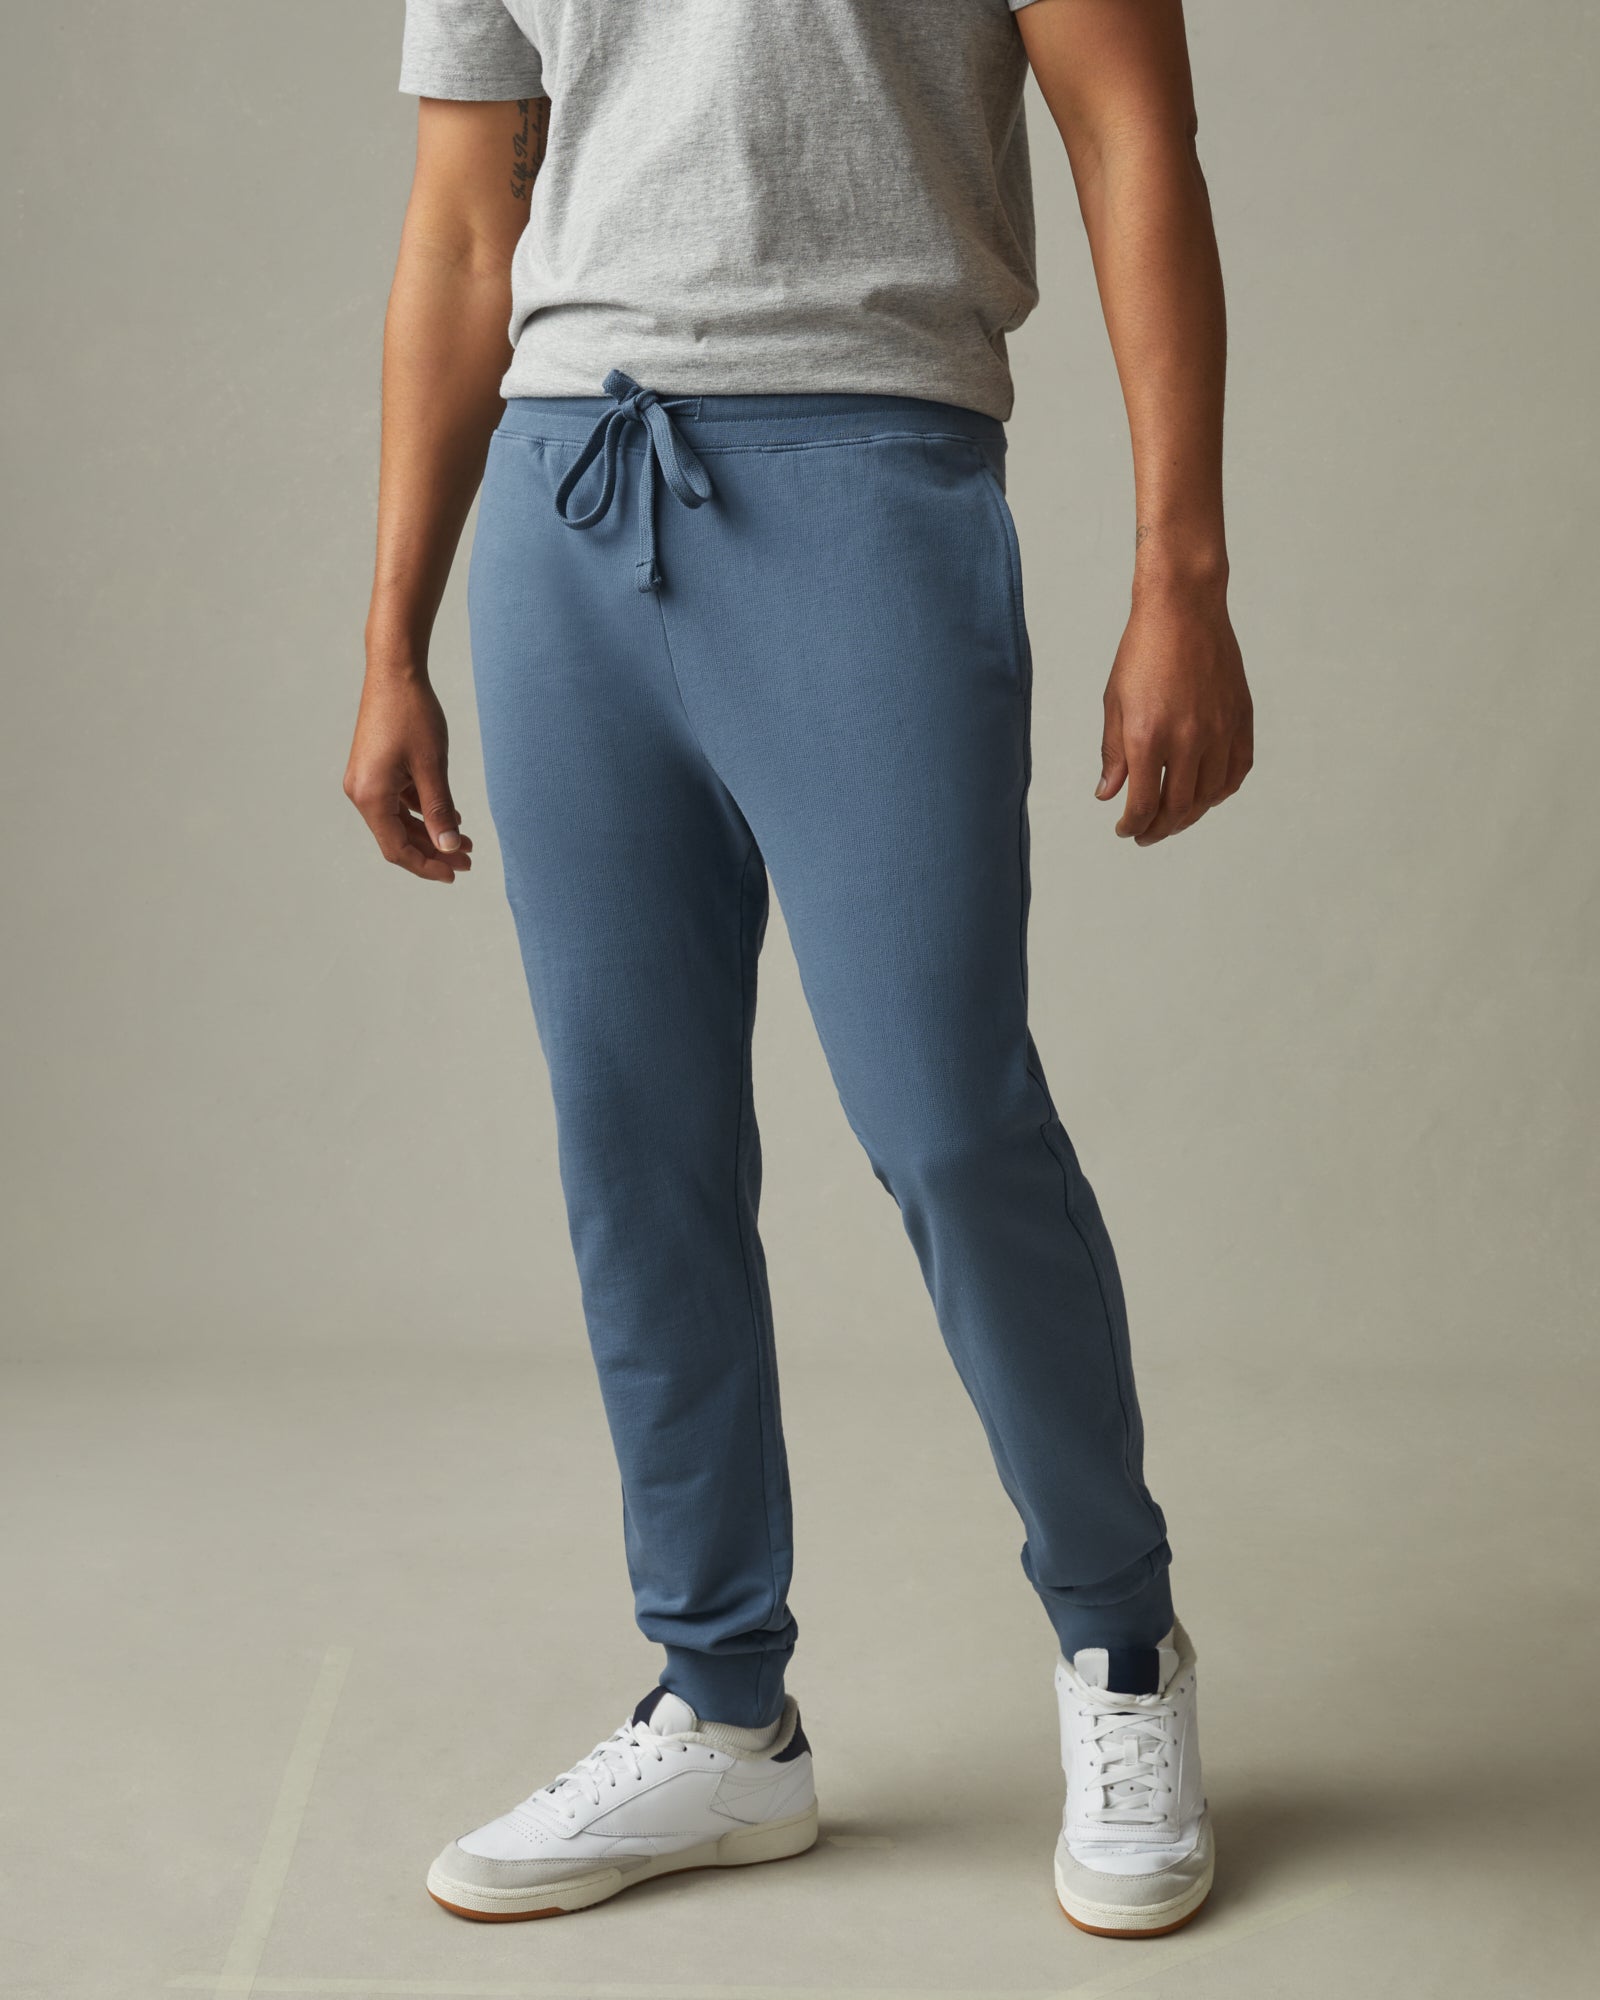 Latest And Greatest French Terry Jogger Wholesale Clearance